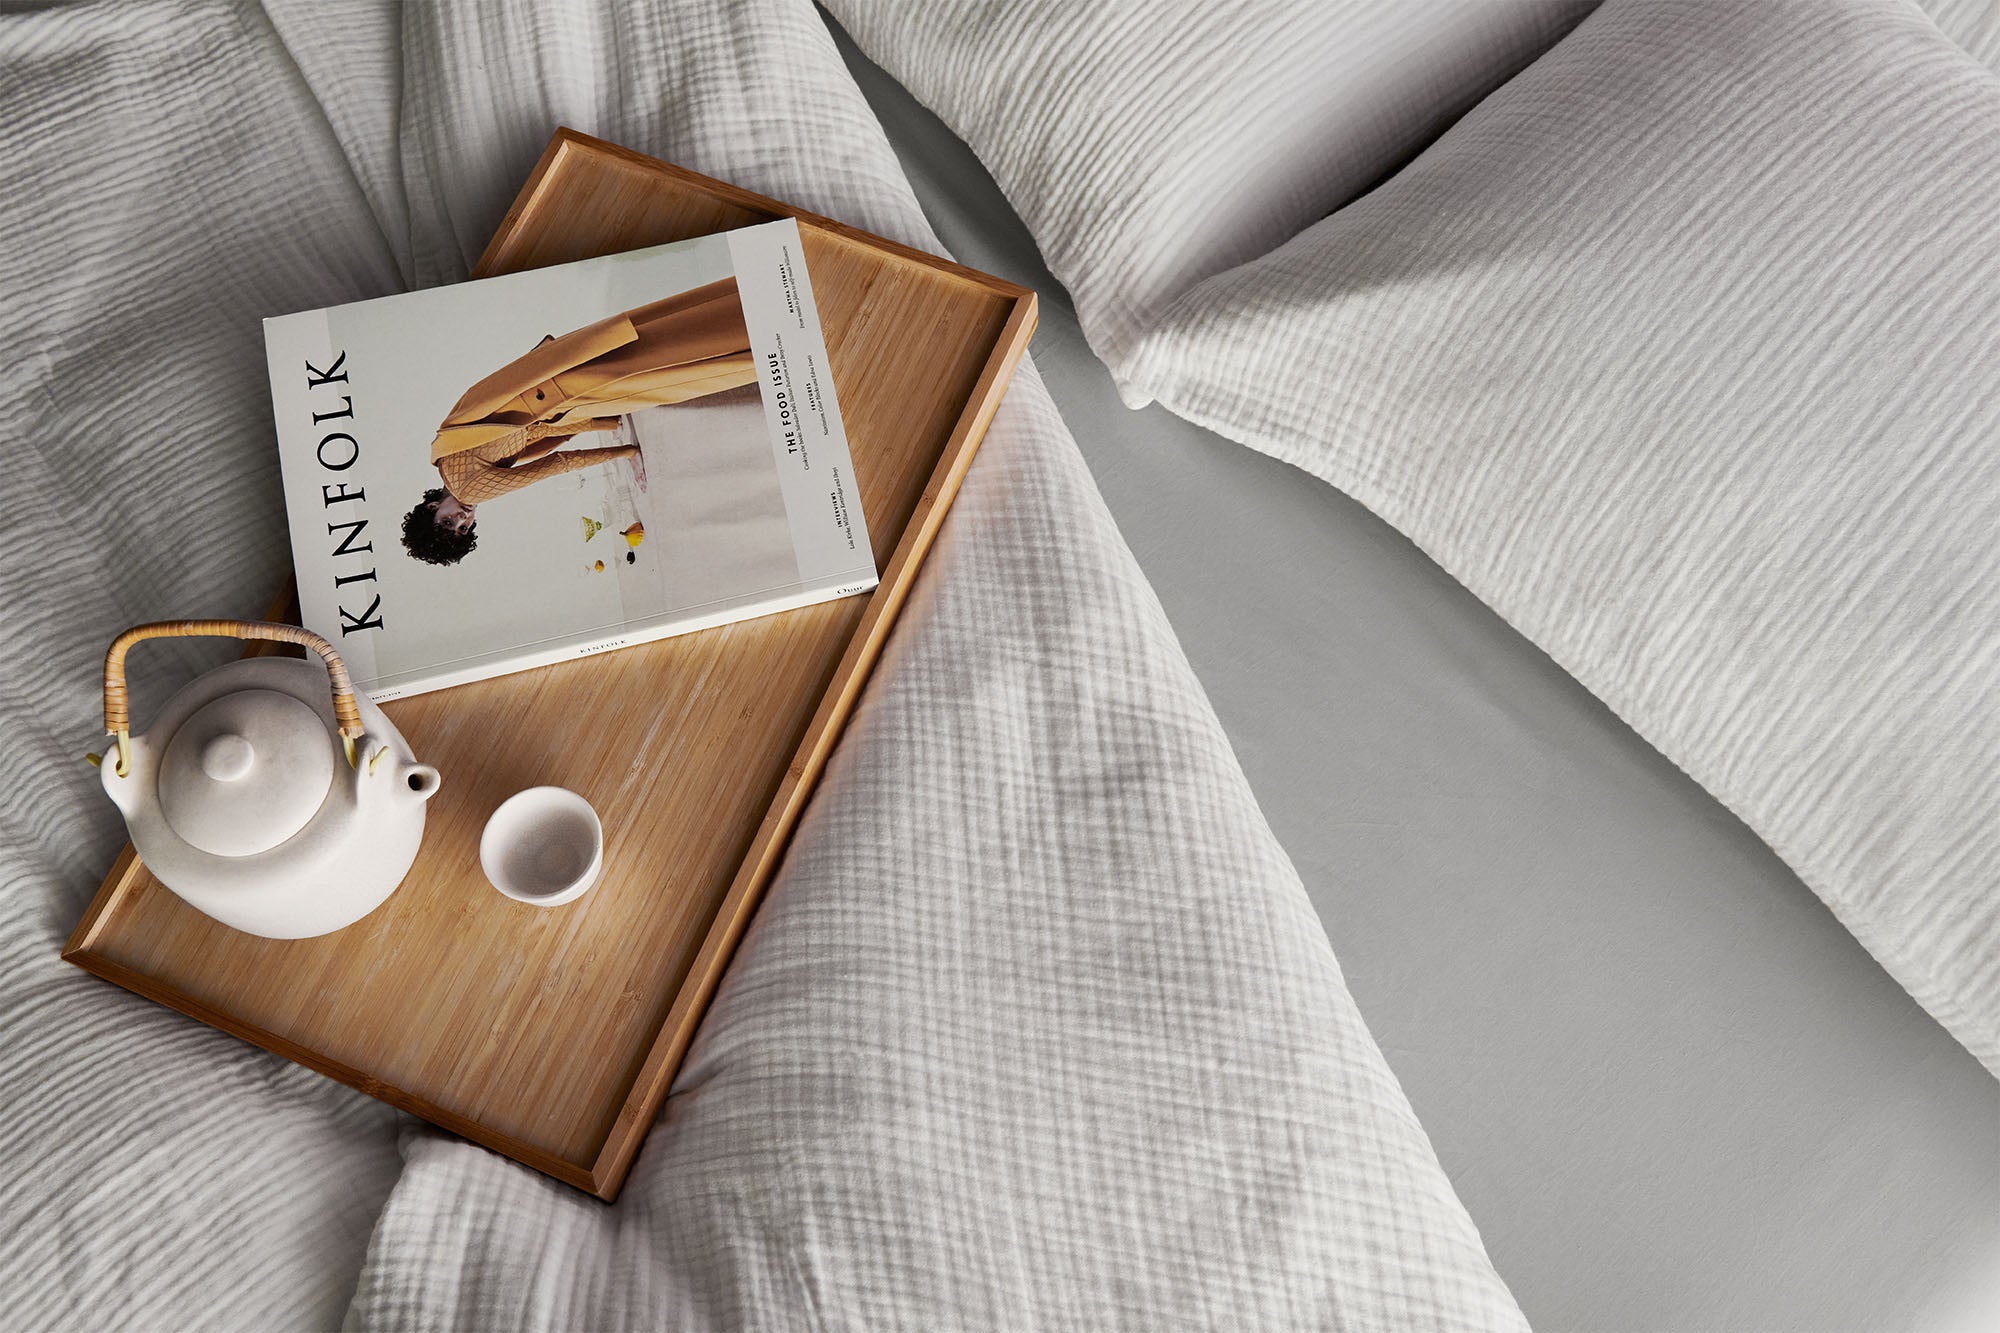 Top down image of a bed dressed in white muslin duvet and pillows, with a grey fitted sheet, and a breakfast tray with a teapot, cup and a magazine